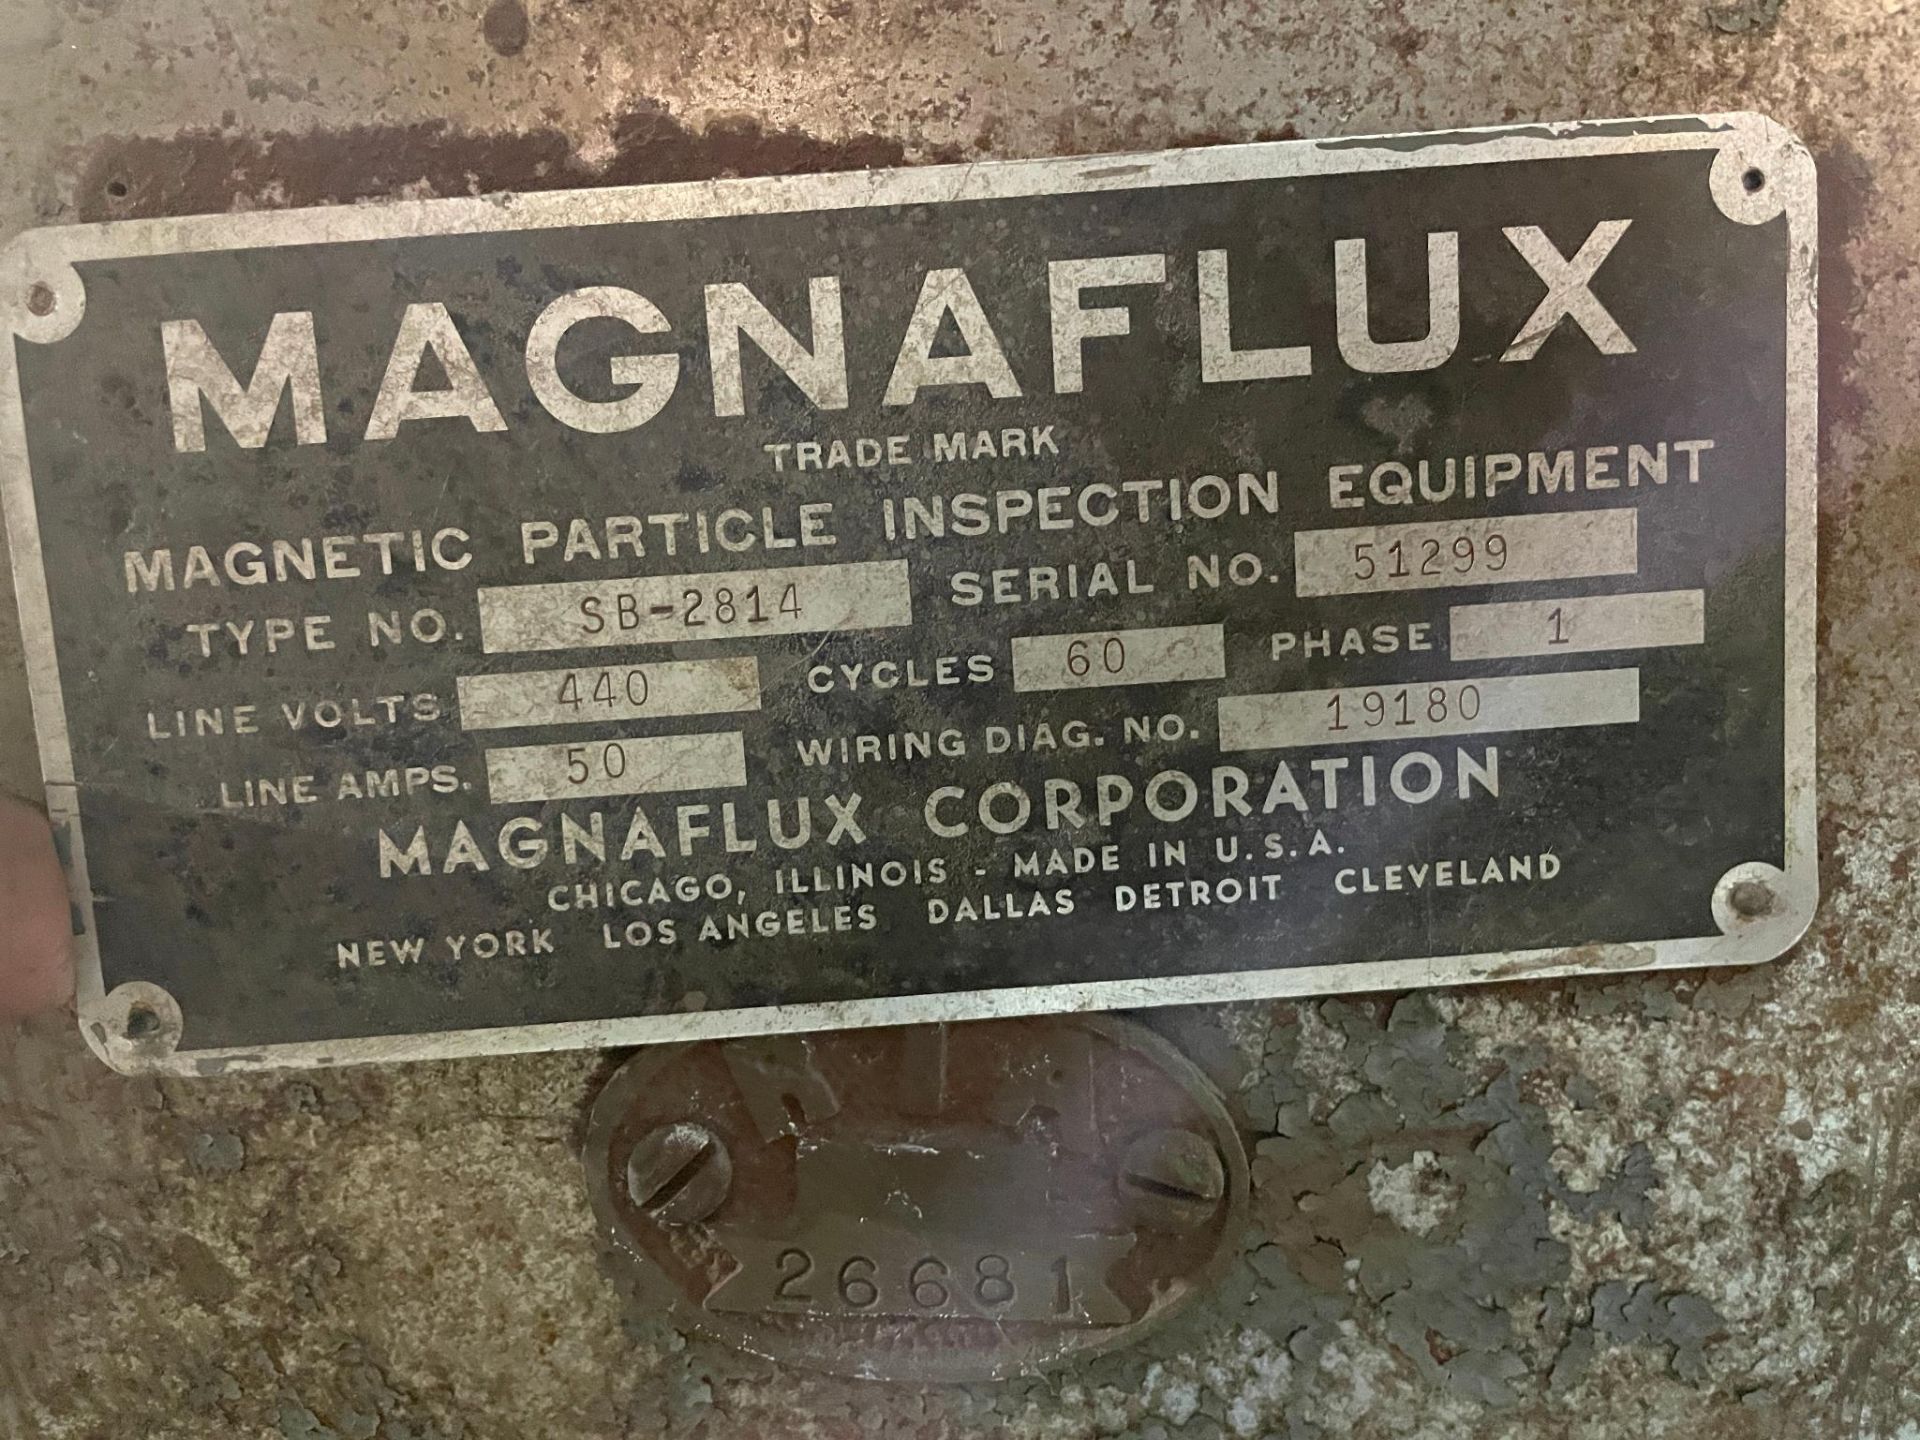 MAGNETIC PARTICLE INSPECTION EQUIPMENT, MAGNAFLUX, TYPE SB-2814, 440 v., 1 Ph., S/N 51299 - Image 2 of 2